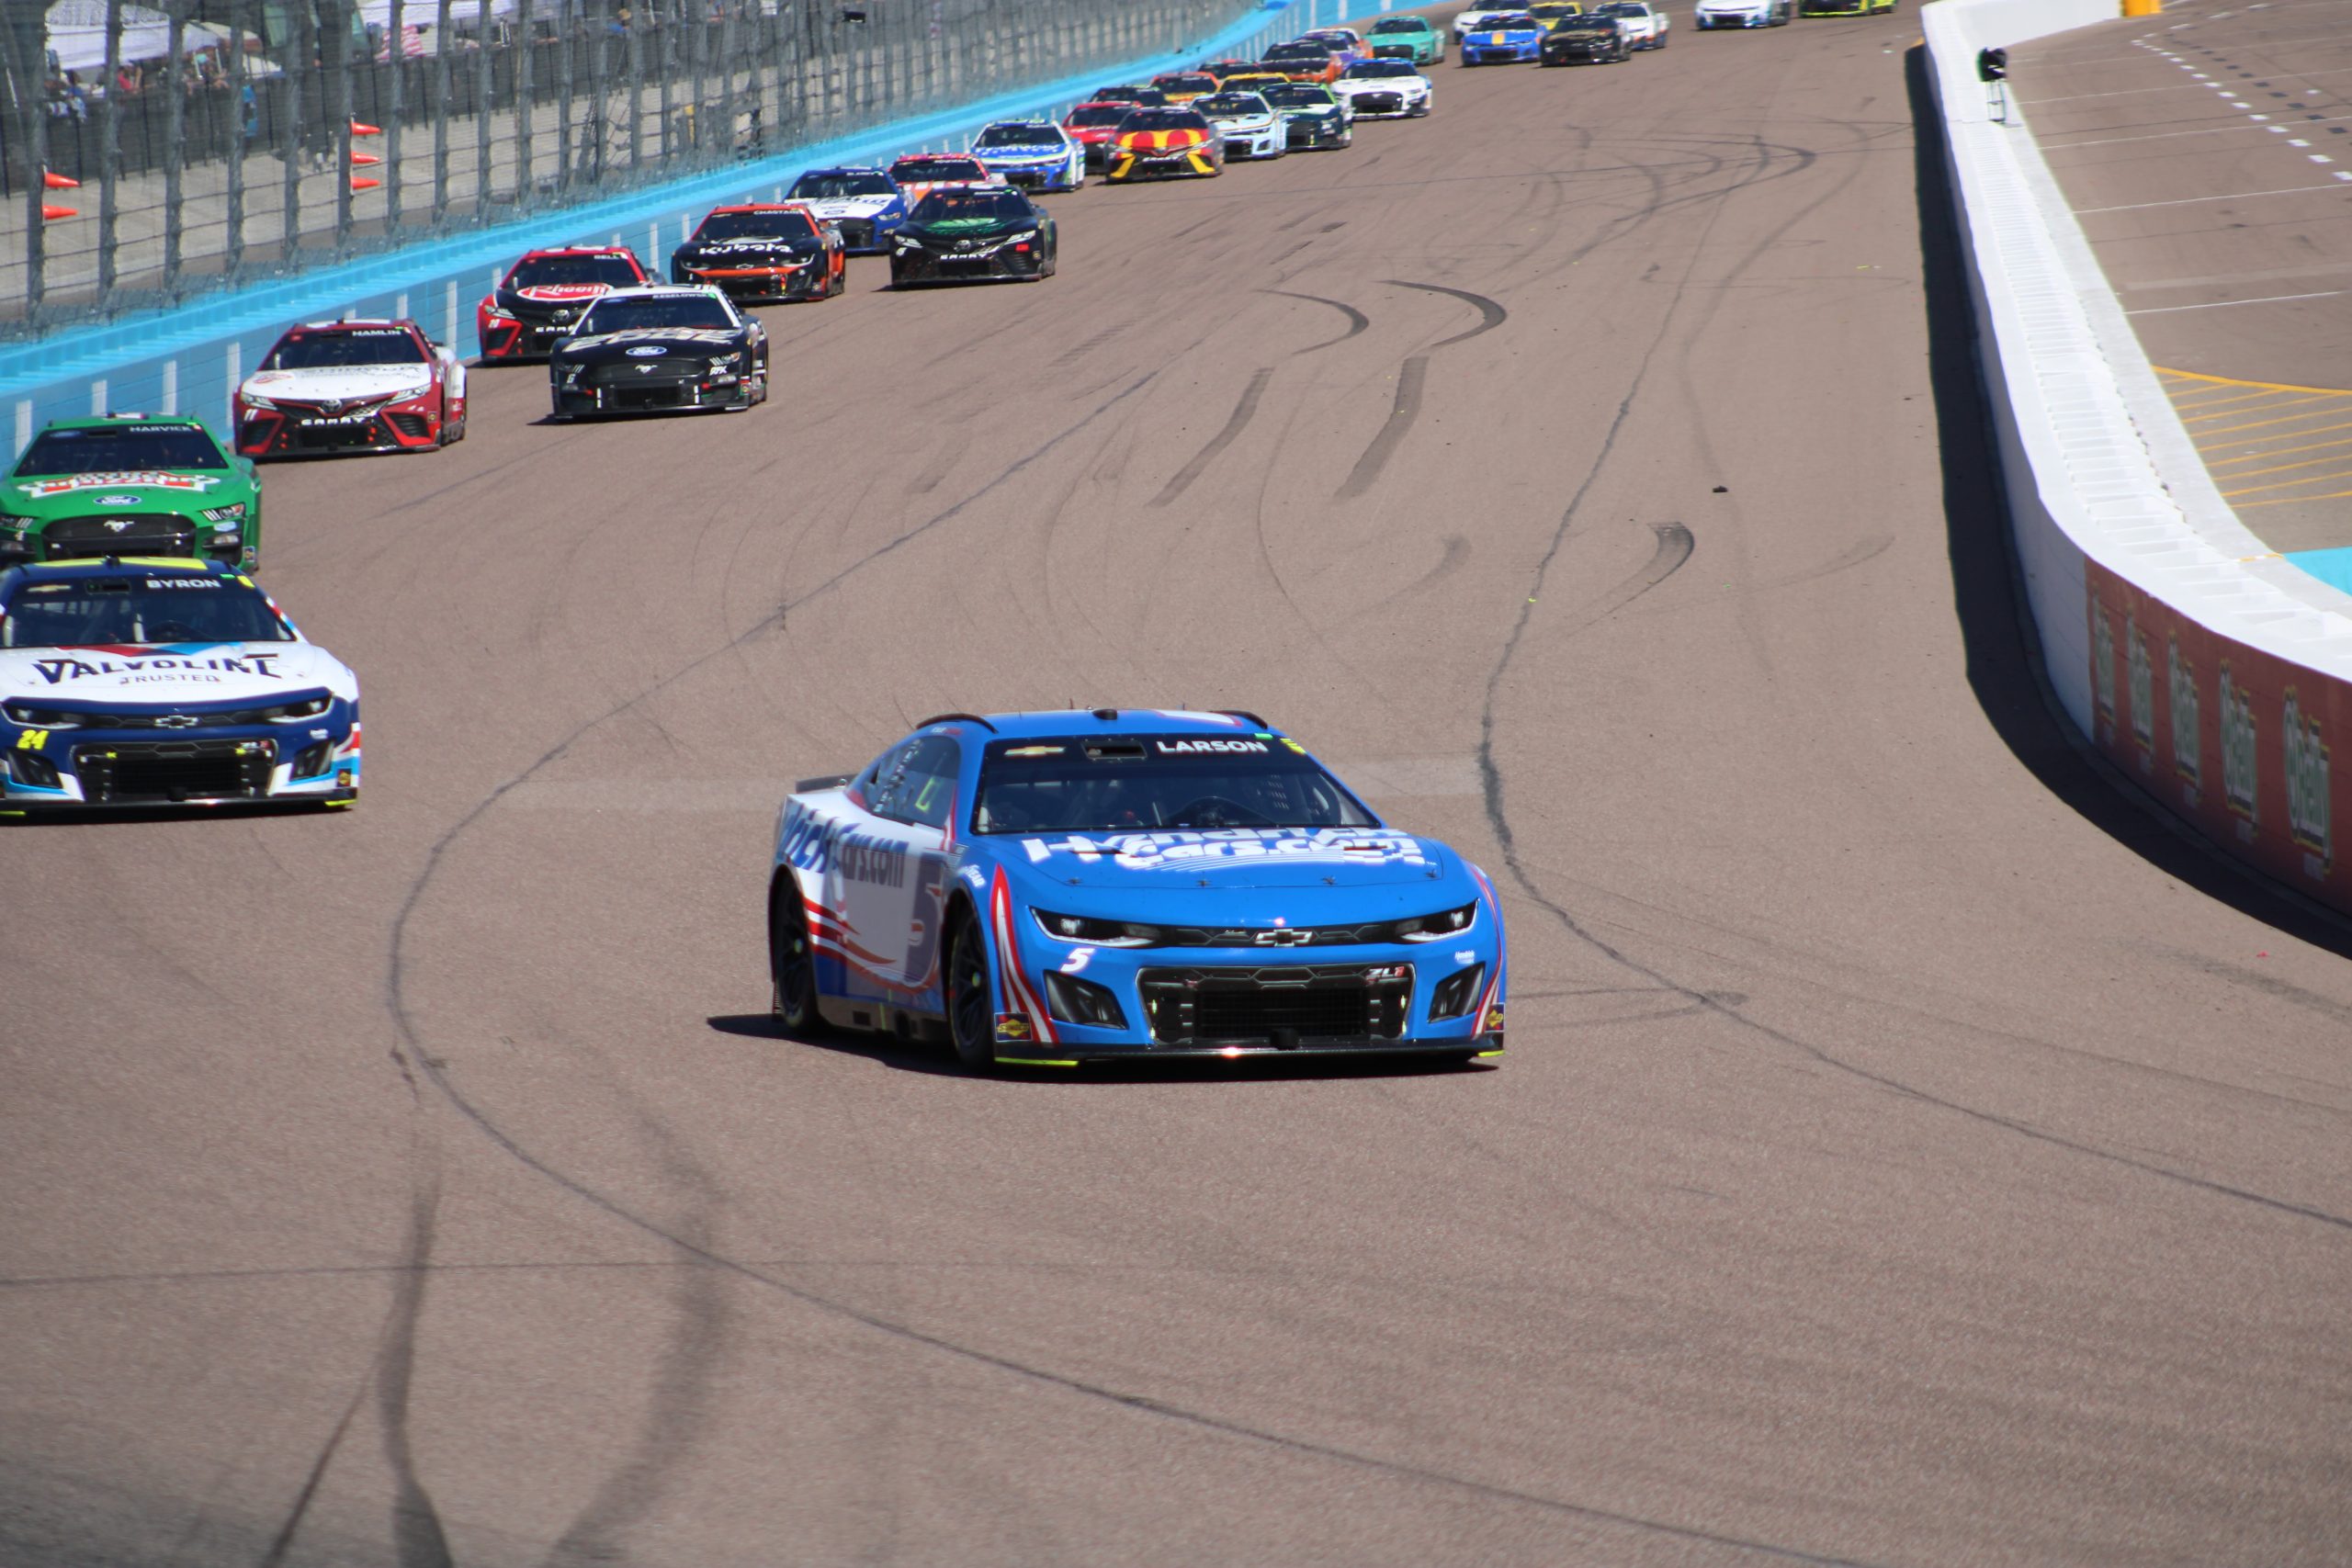 Larson had one of the best cars in Sunday's race at Phoenix. (Photo: Michael Donohue | The Podium Finish)